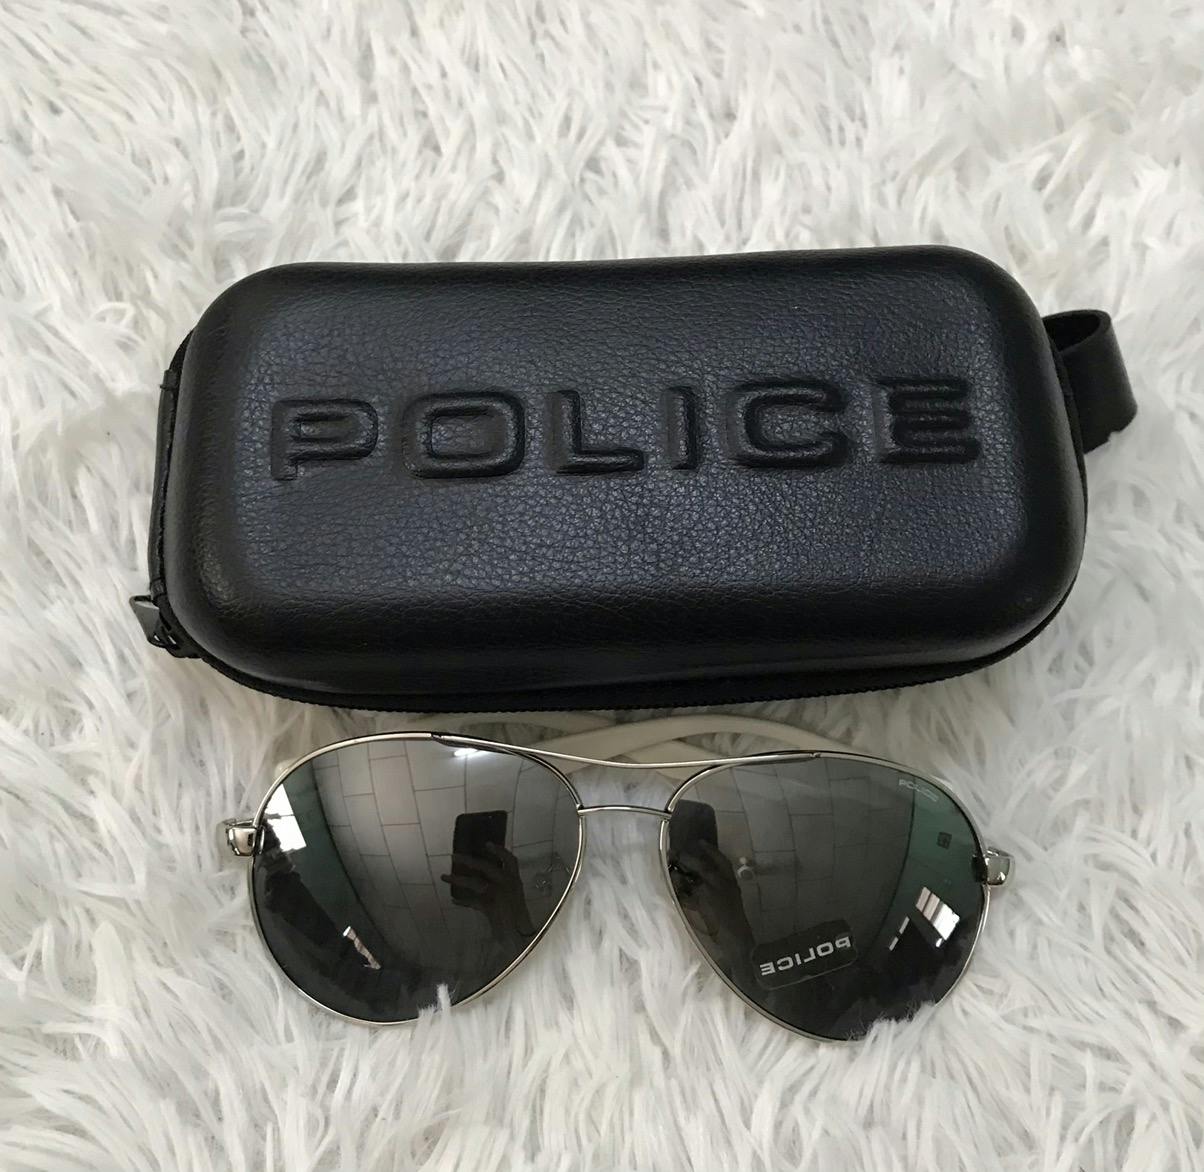 Police sunglass made in Italy - 1